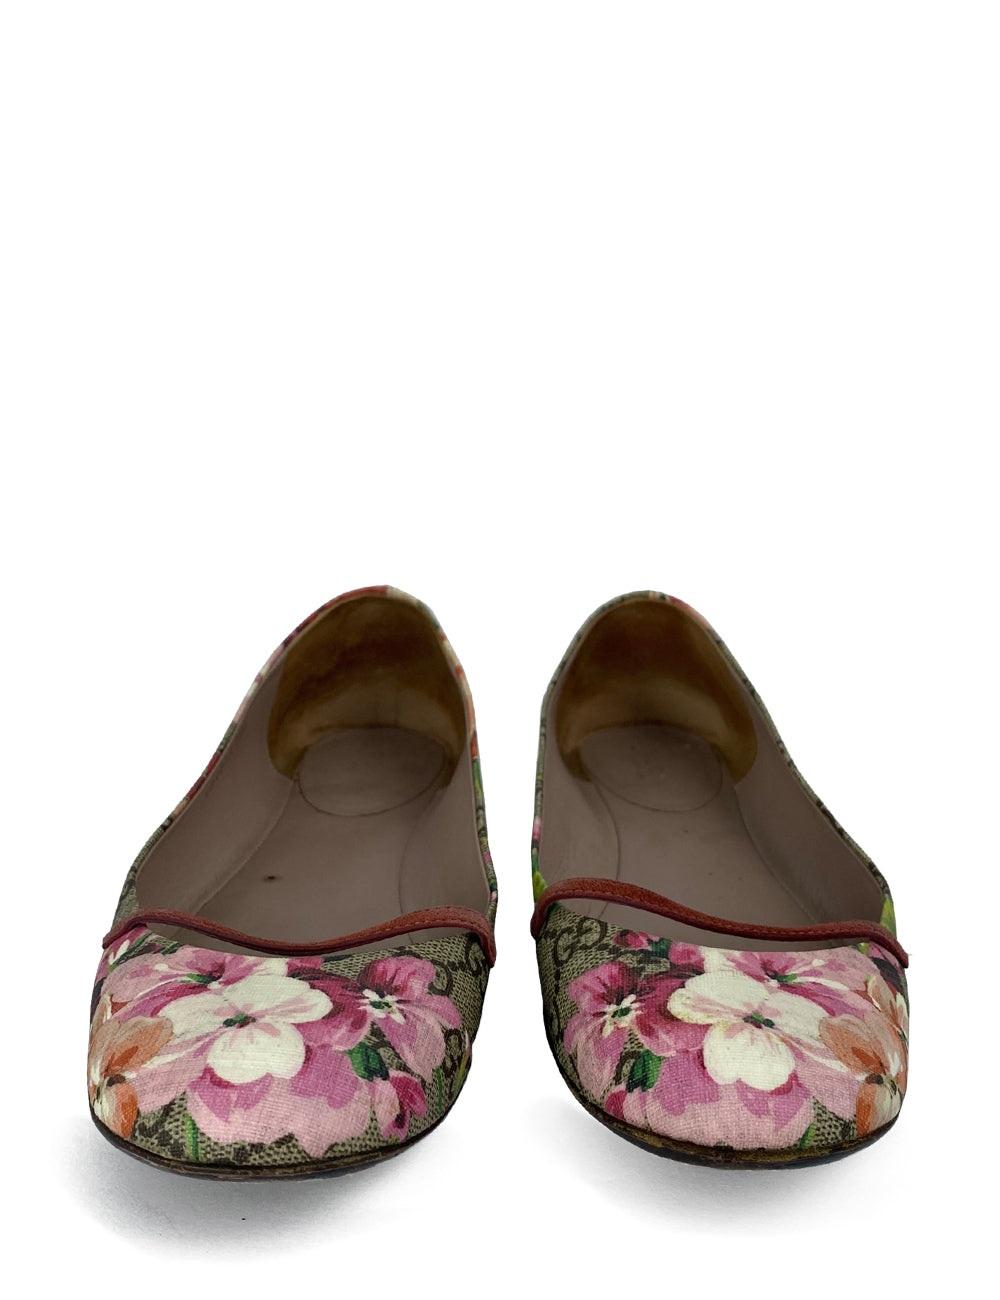 Gucci GG Supreme Monogram Blooms Ballet Flats in Antique Rose. Features a red leather strap and a rounded toe. 

Additional information:
Material: Leather
Size: EU 38.5 
Overall Condition: Good
Interior Condition: Signs of use
Exterior Condition: